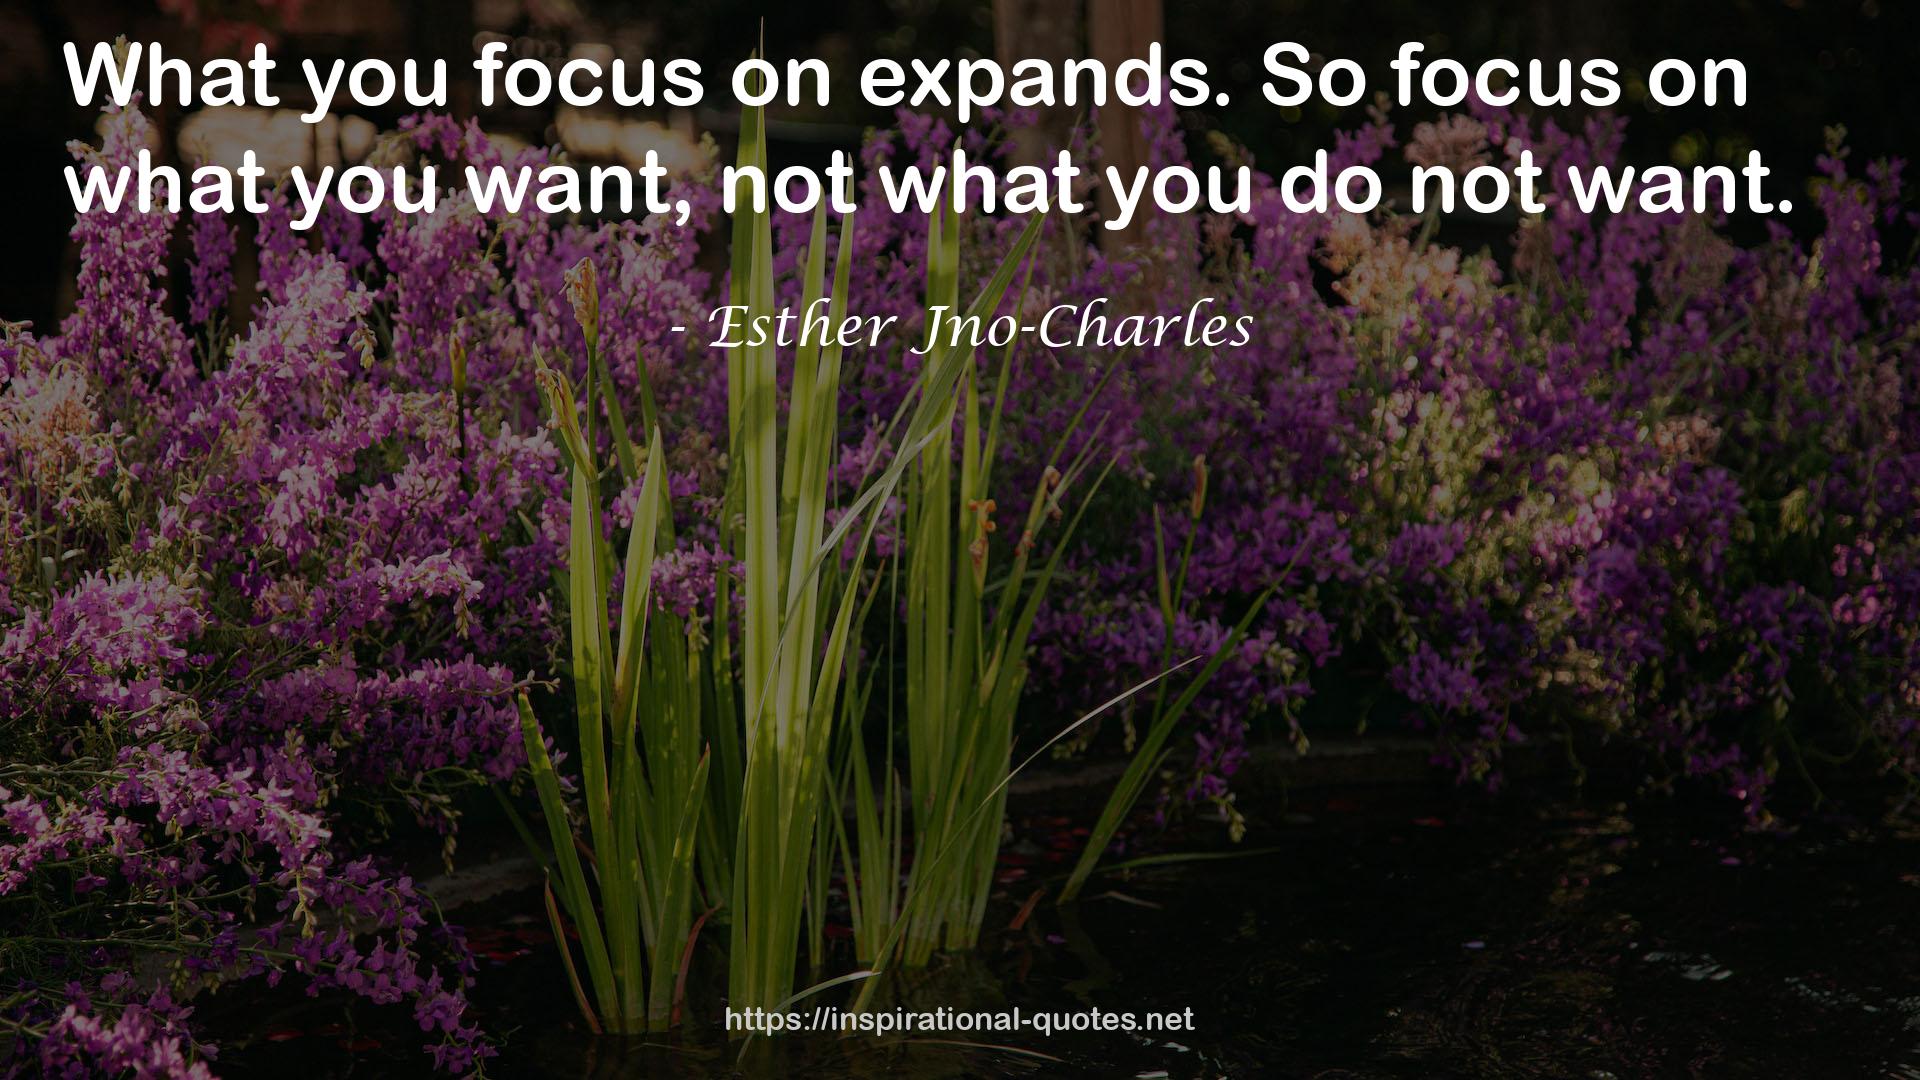 Esther Jno-Charles QUOTES